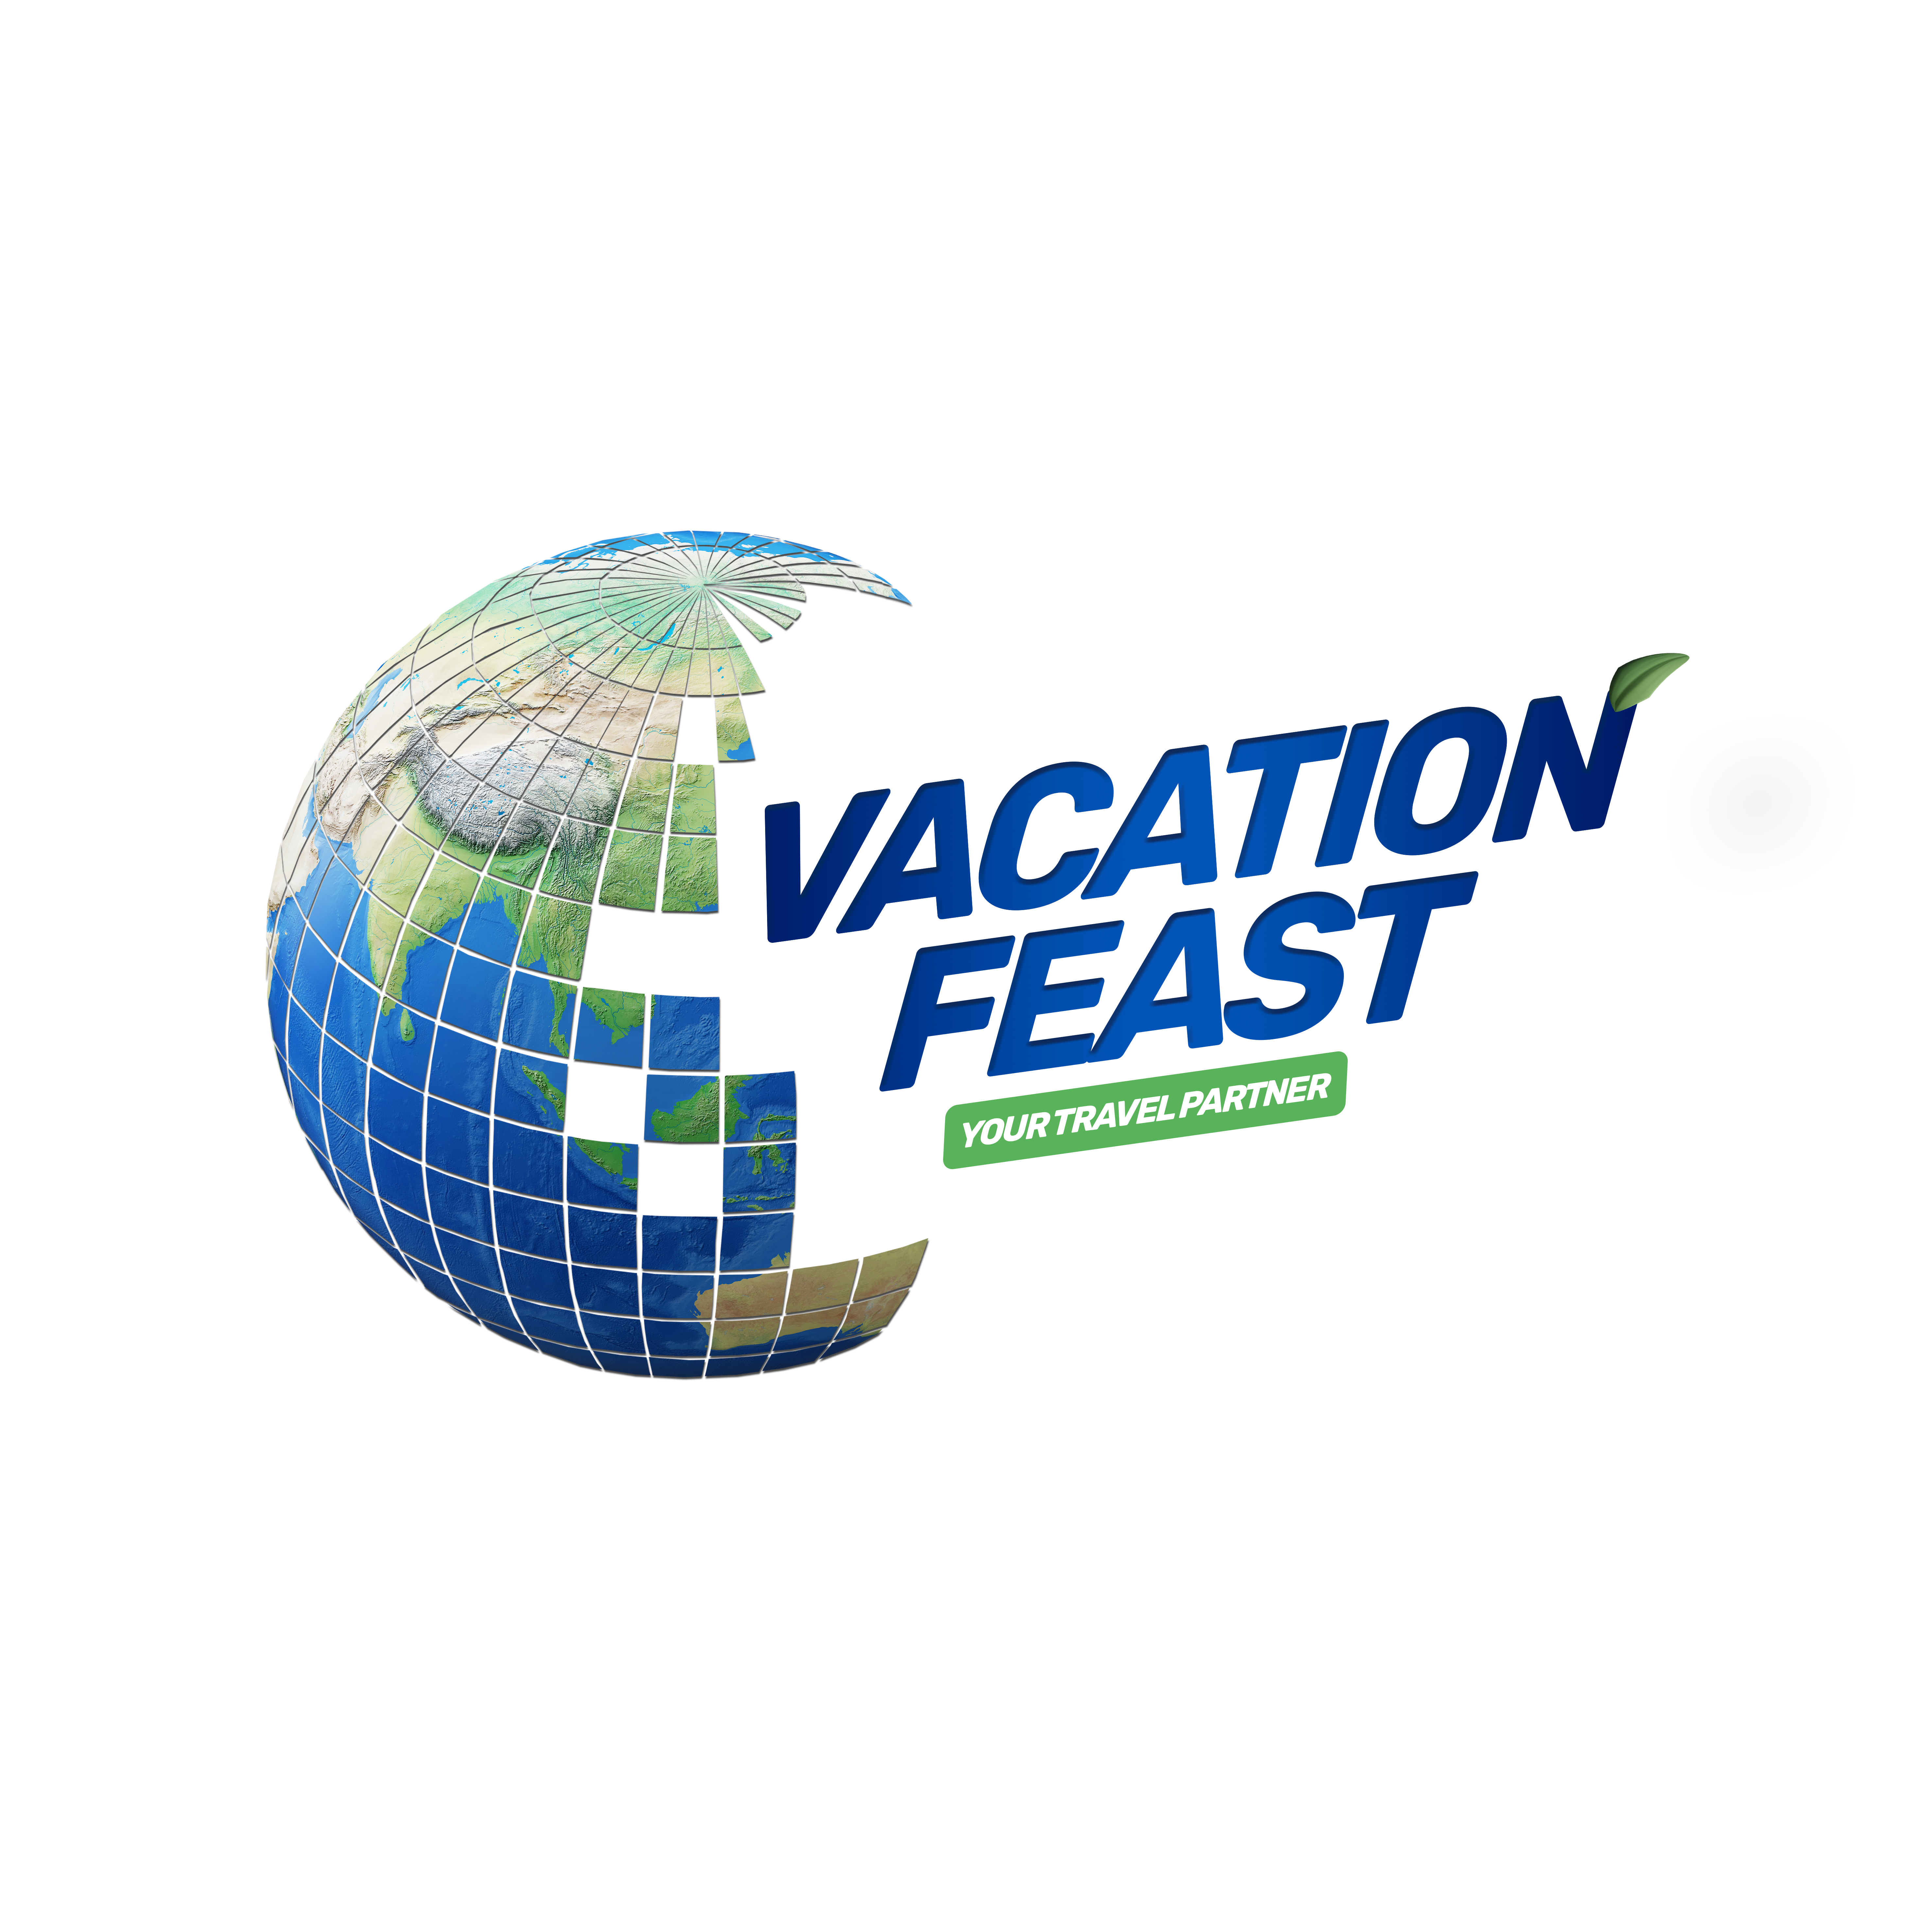 Travel Agent - Vacation Feast